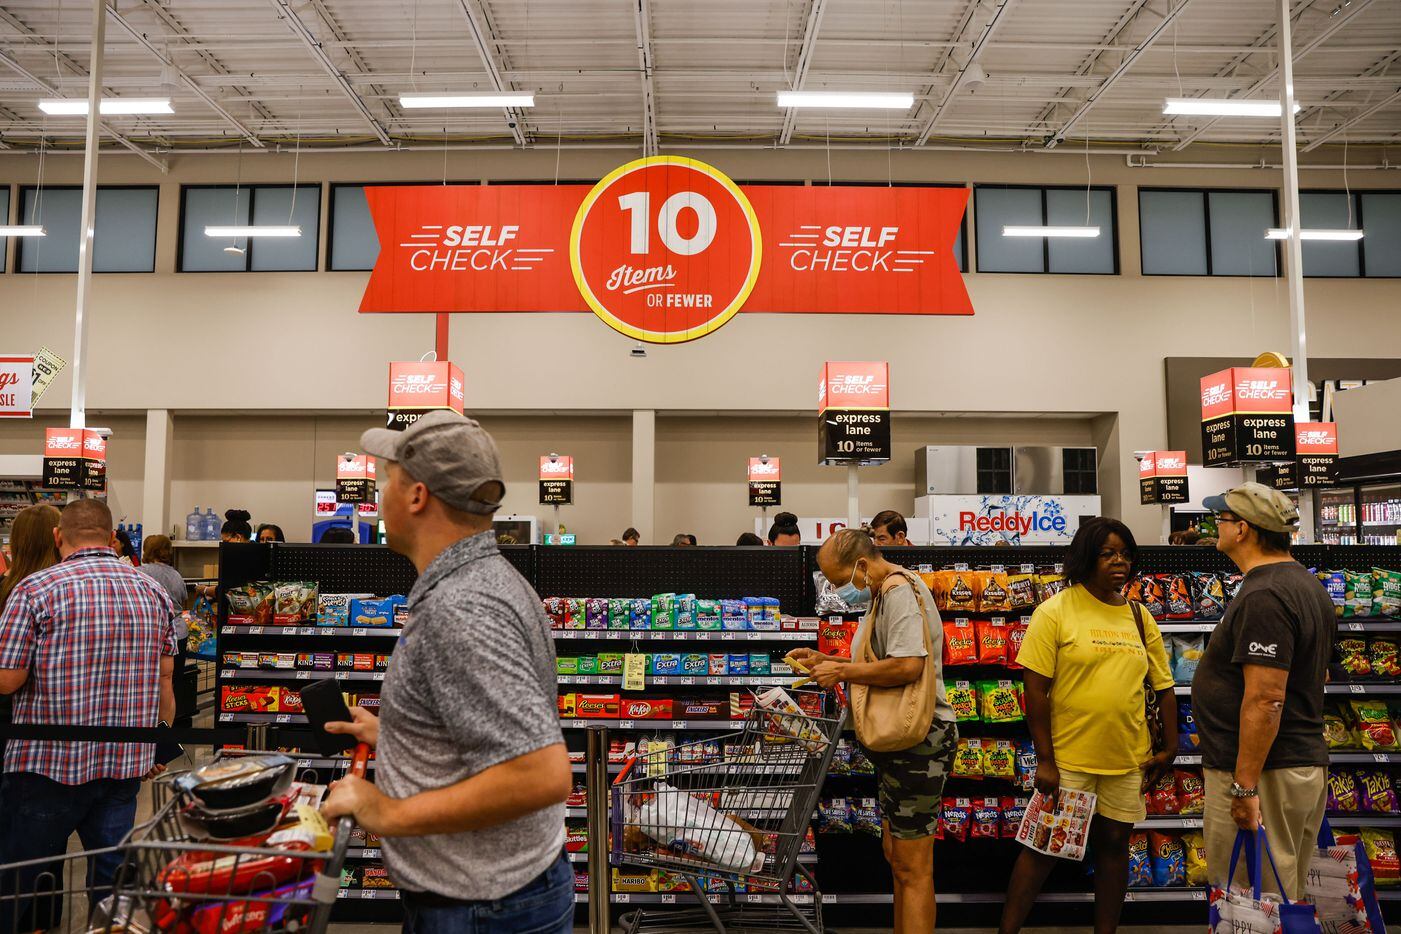 The new H-E-B store was busy as soon as it opened on Wednesday.